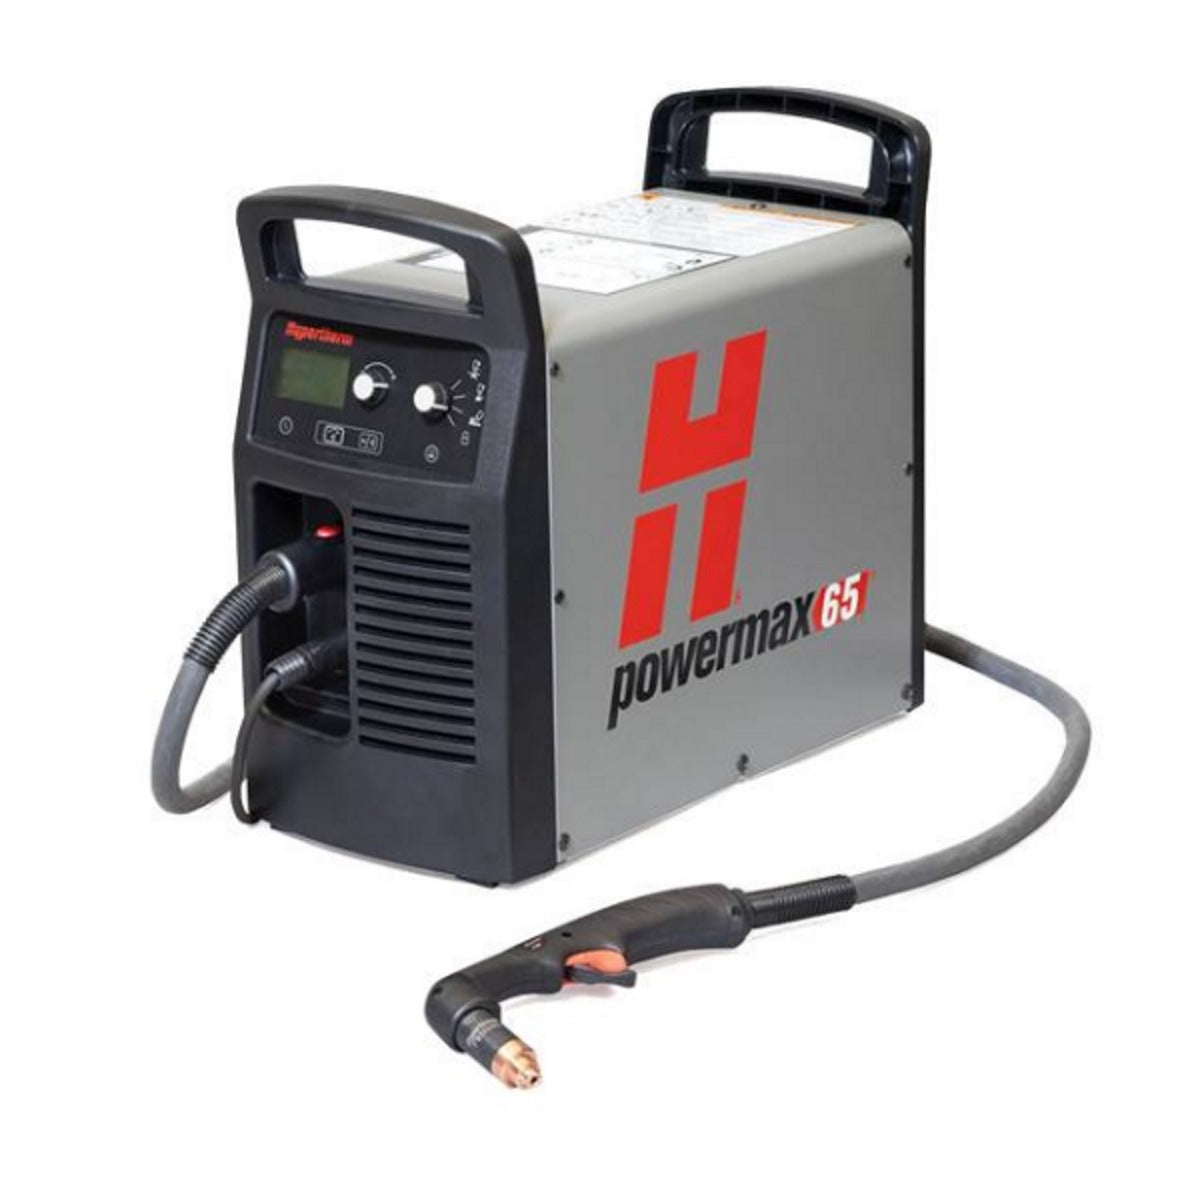 Hypertherm Powermax 65 w/25ft Hand Torch and Air Filter Pkg (083273)